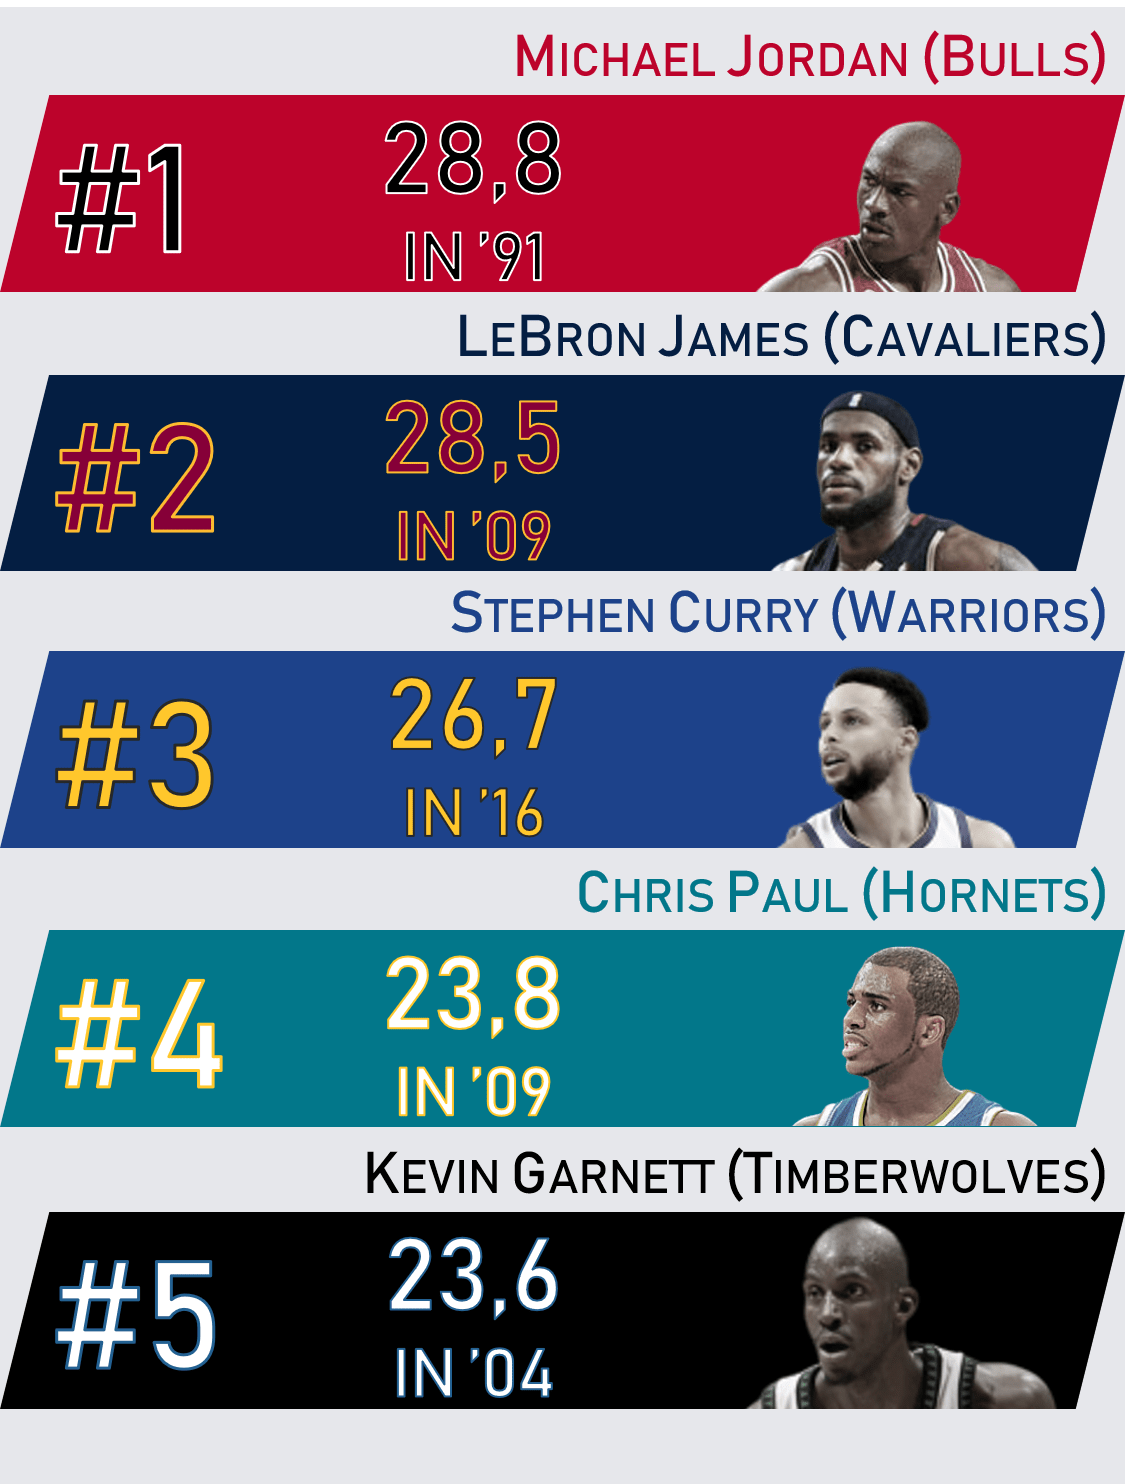 Best 5 players of NBA based on each player's best season